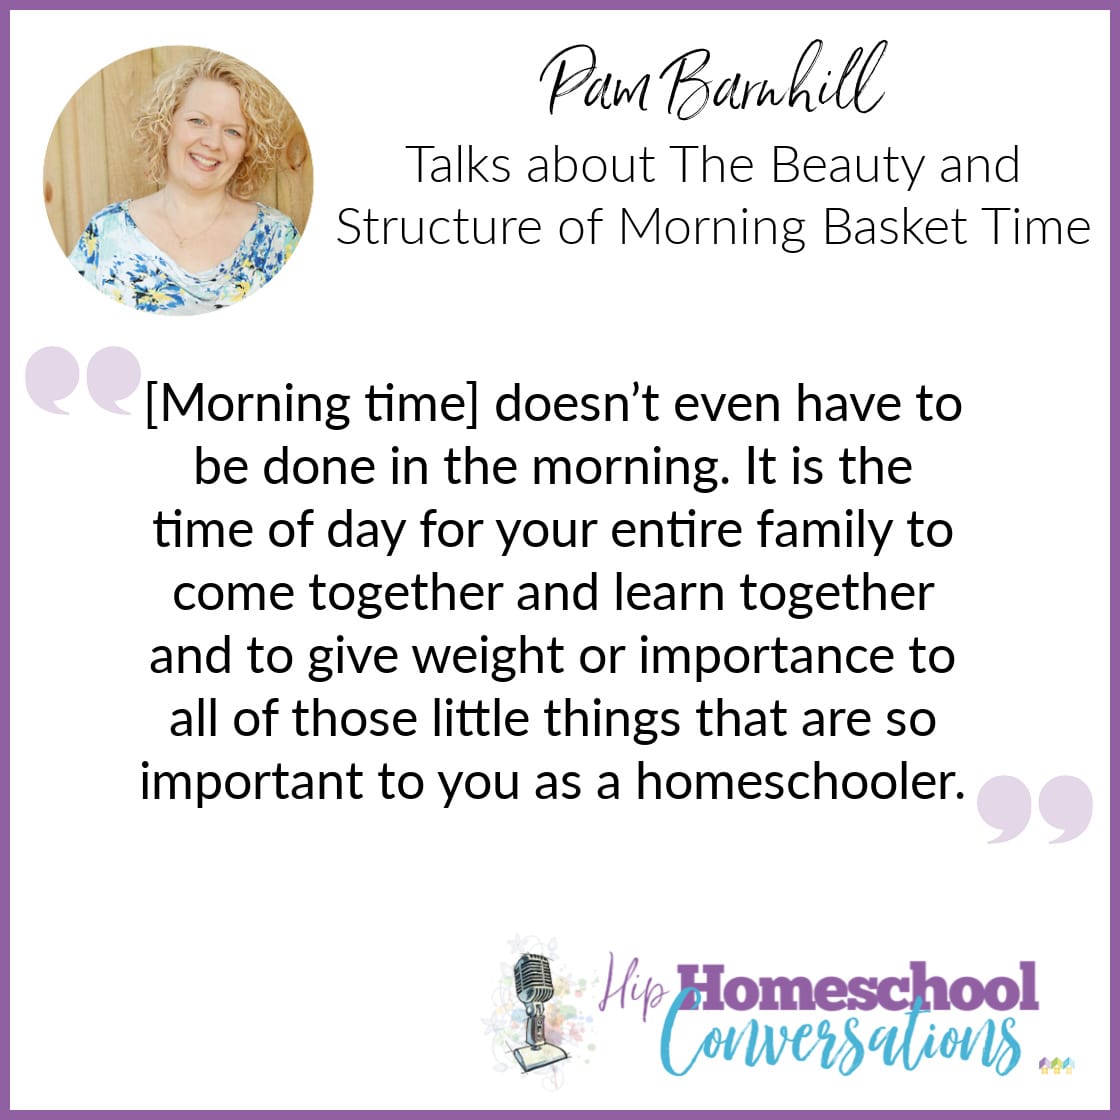 Homeschooling offers wonderful flexibility and freedom, but getting started each day and covering everything can be challenging and stressful. Join Trish Corlew as she interviews Pam Barnhill, author, speaker, and veteran homeschooling mom.